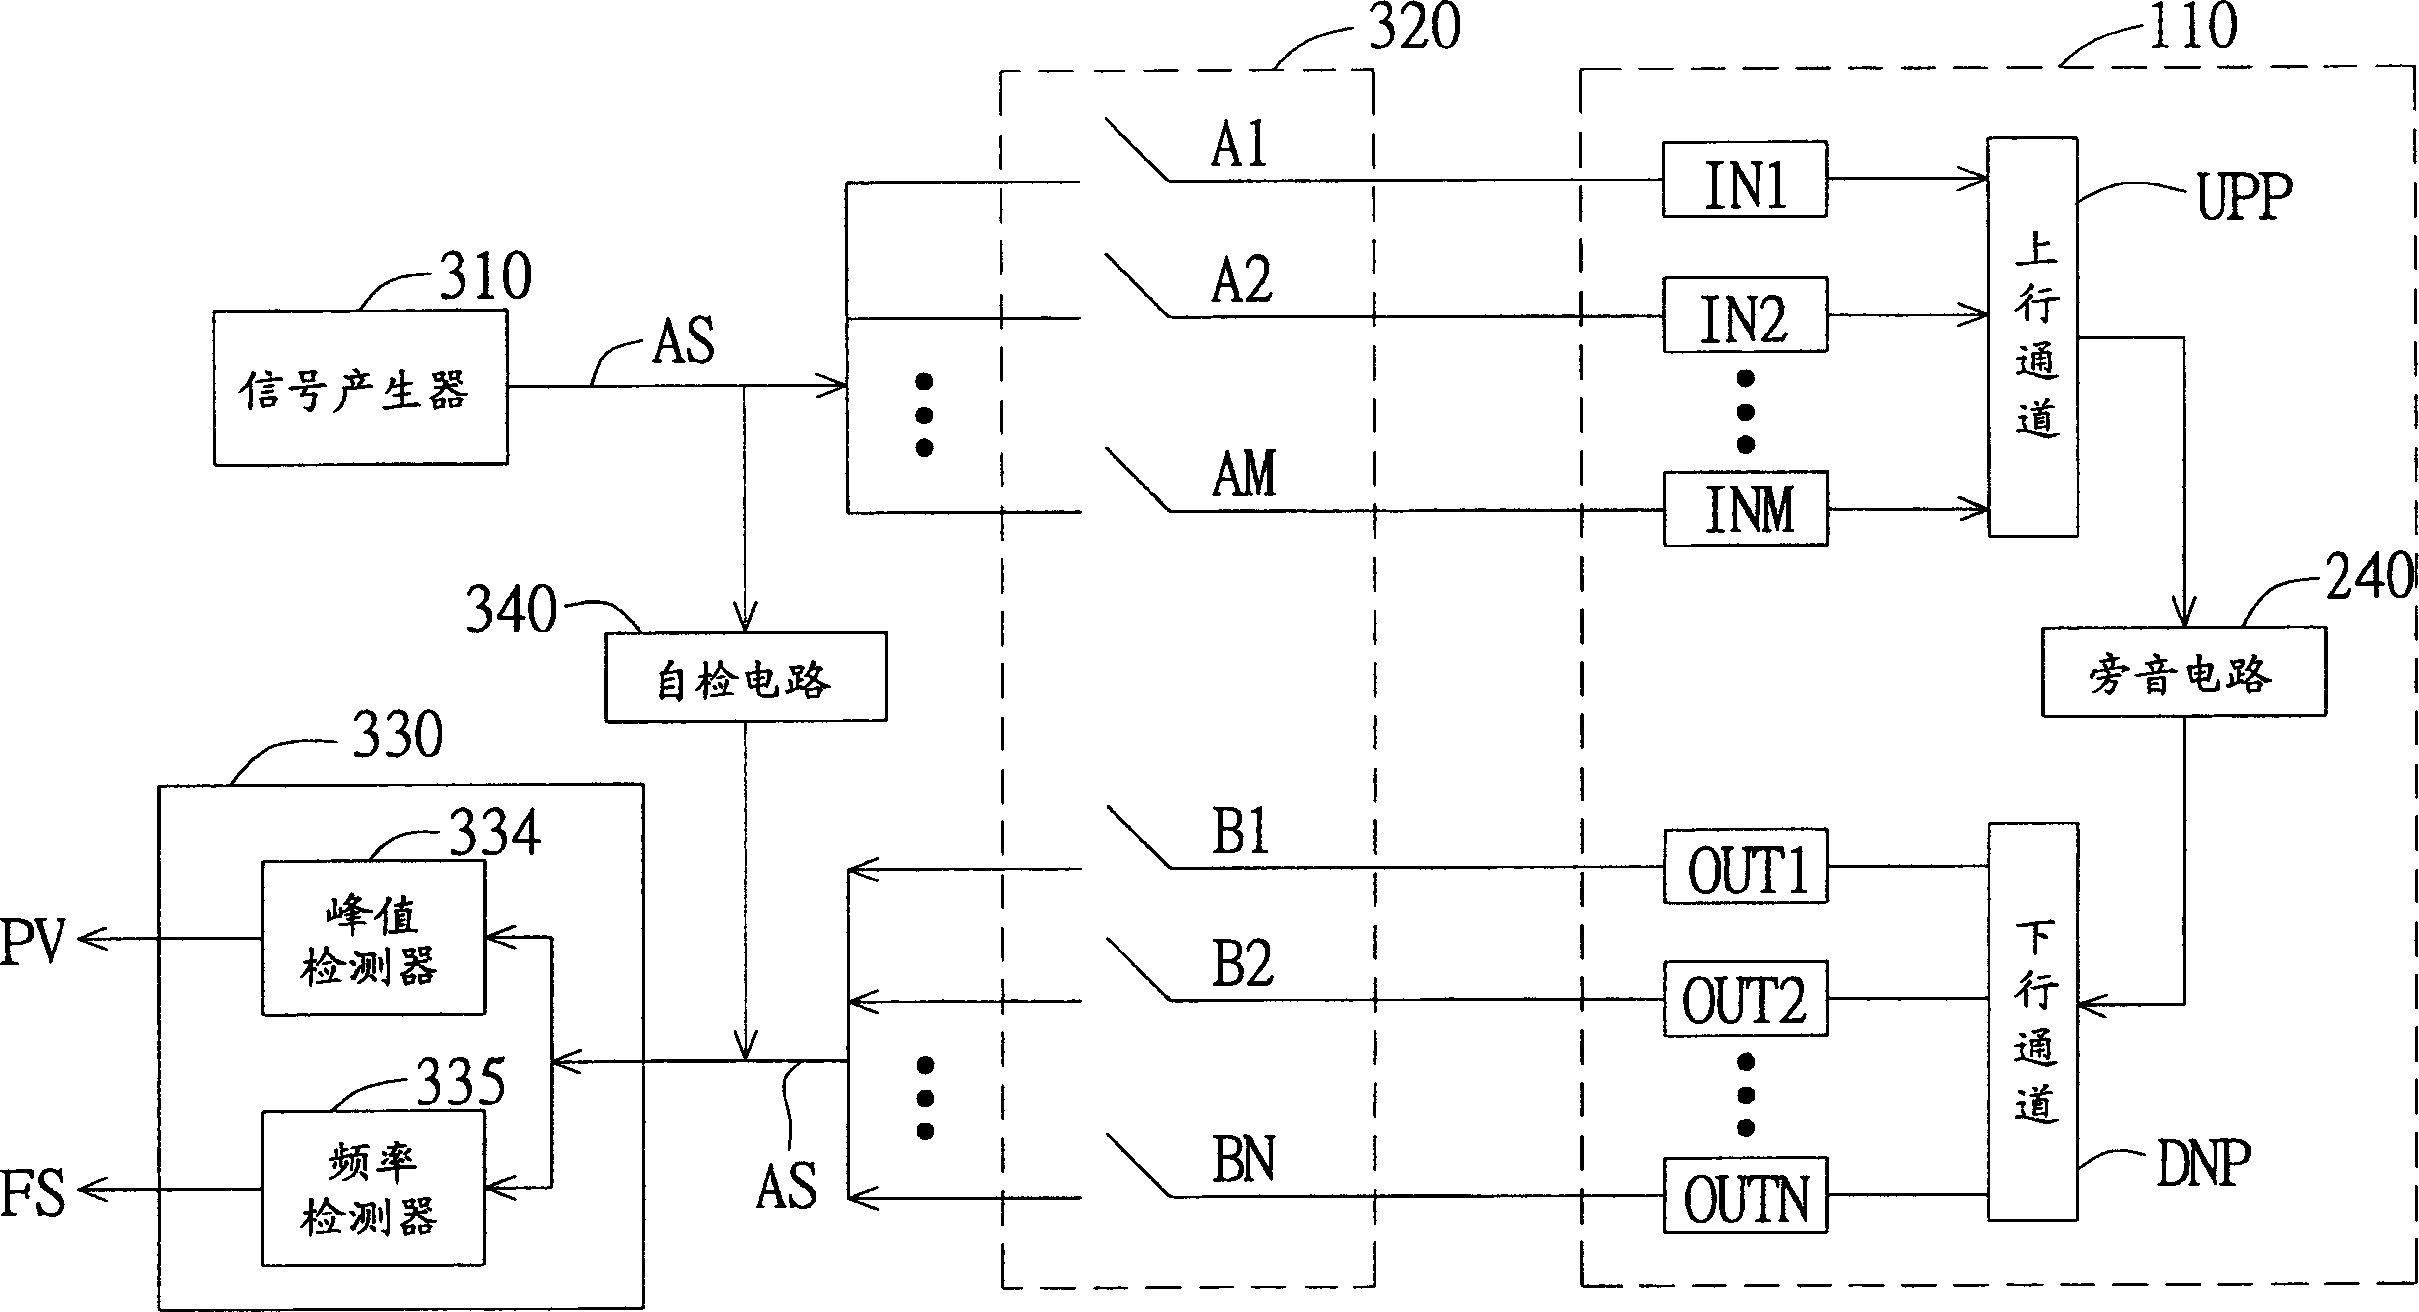 Function detection device of voice module